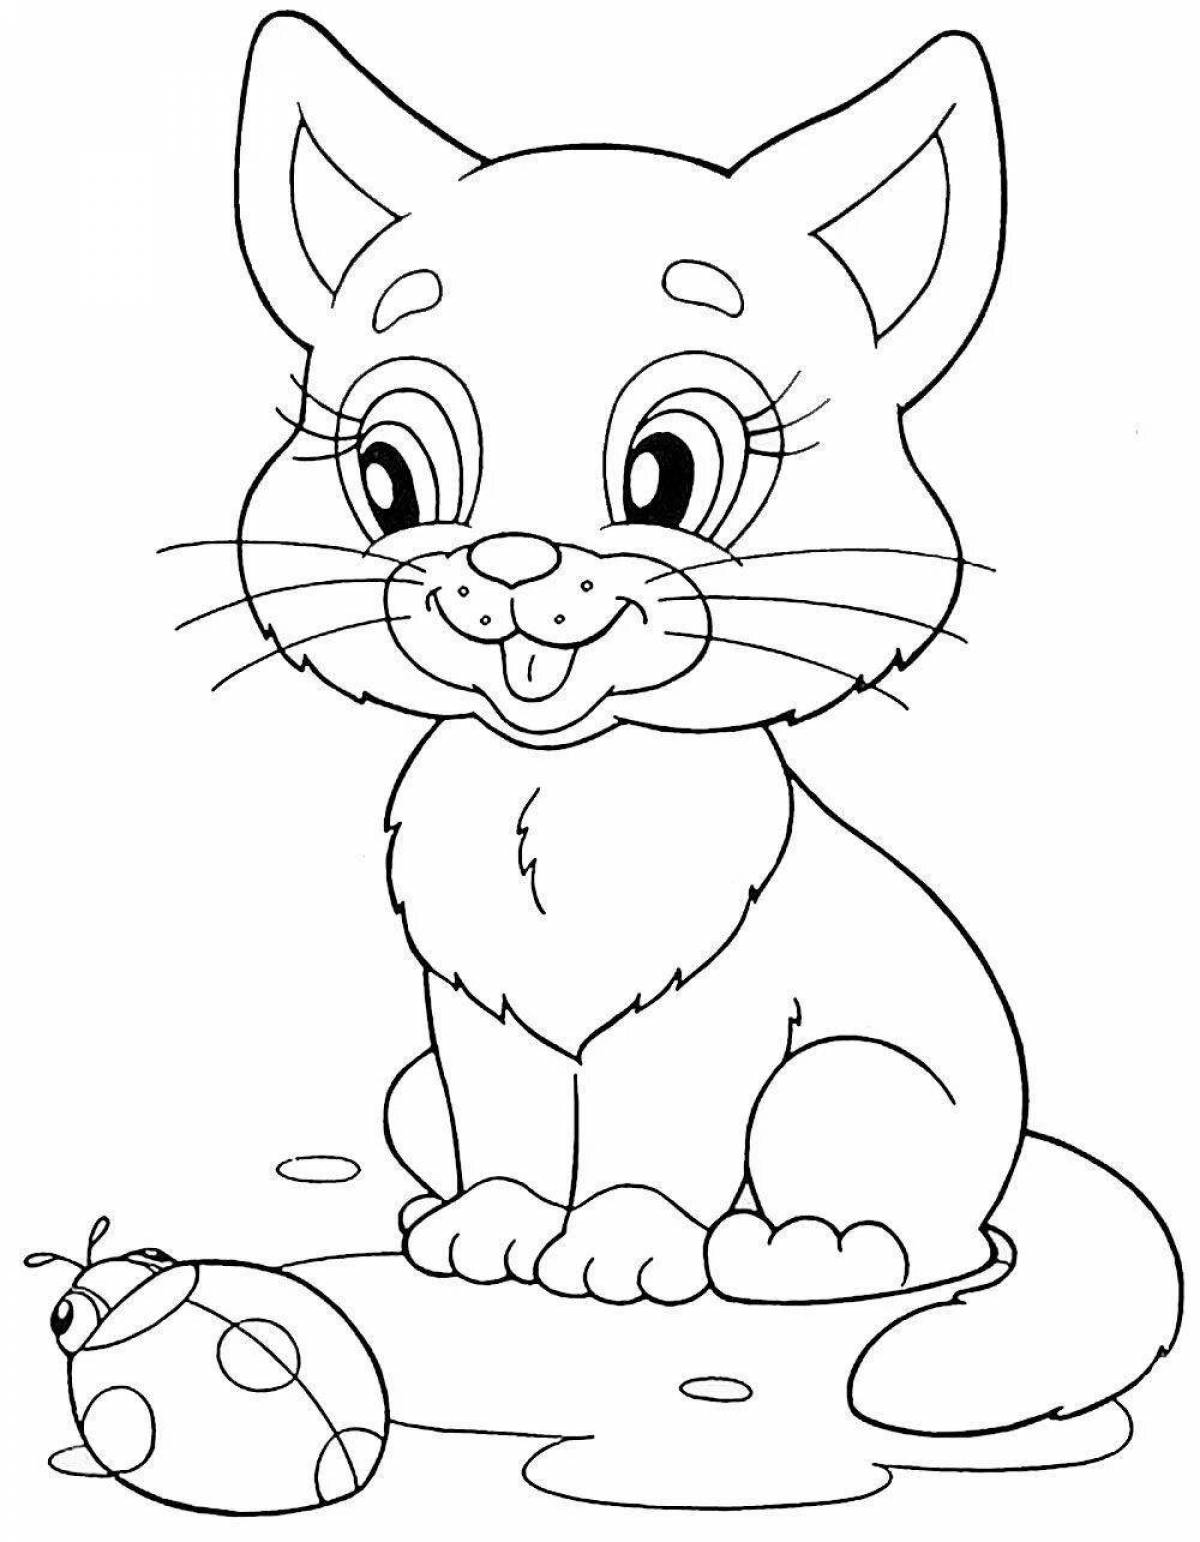 Playful animal coloring book for 7 year olds